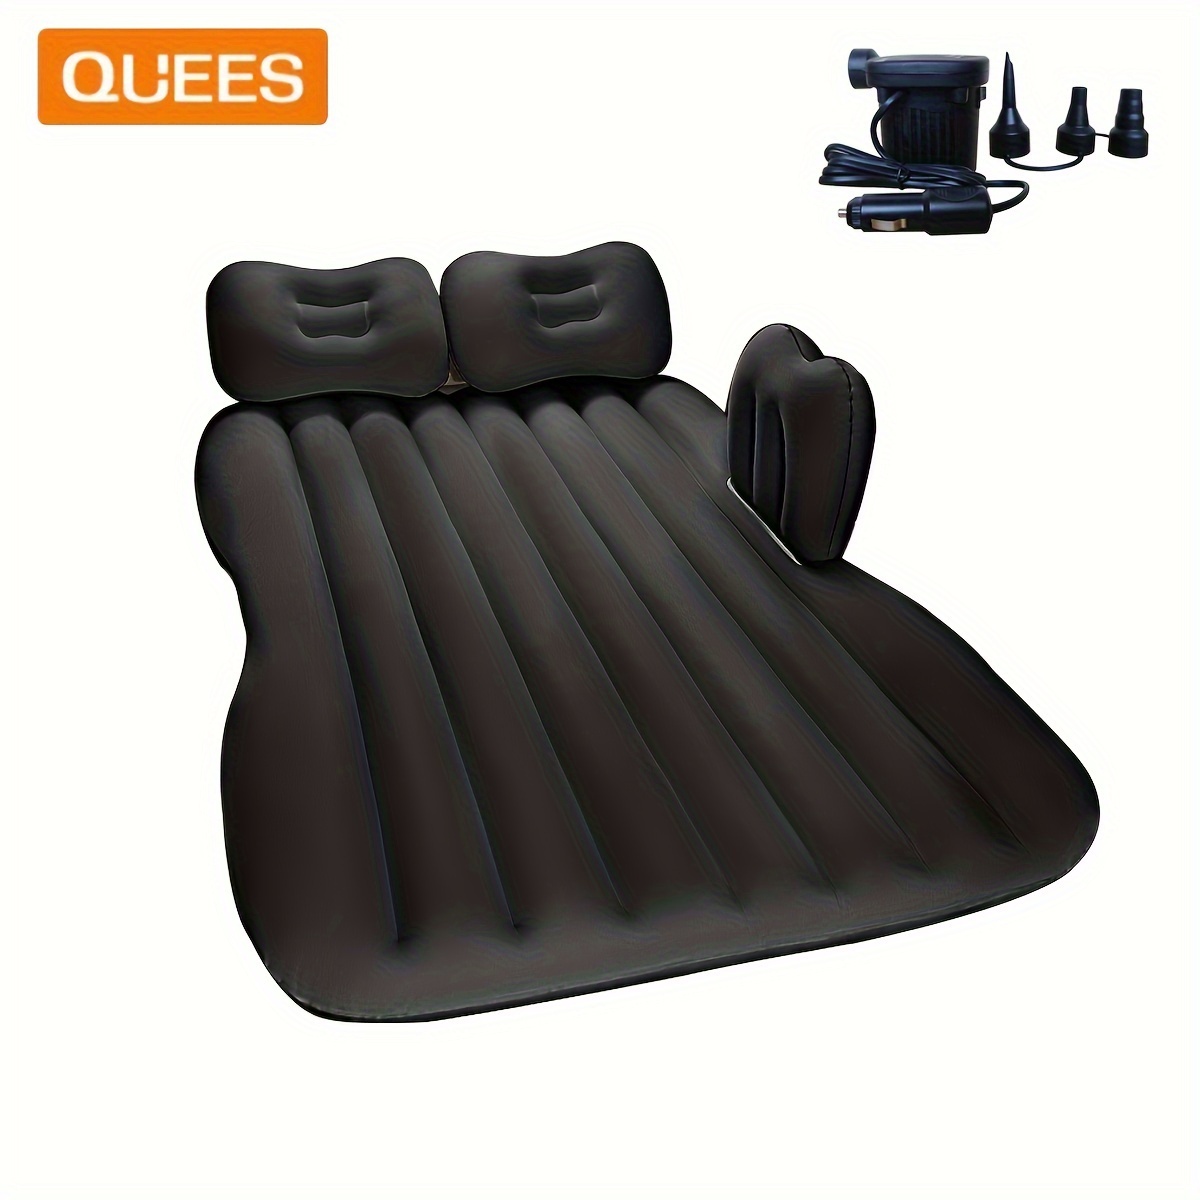 

Air Mattress With Pump, Inflatable Car Bed For Sleepping, With Pillows & Piers, Thickened Flocking & Pvc Surface, Air Mattress For Camping, Home, Travel